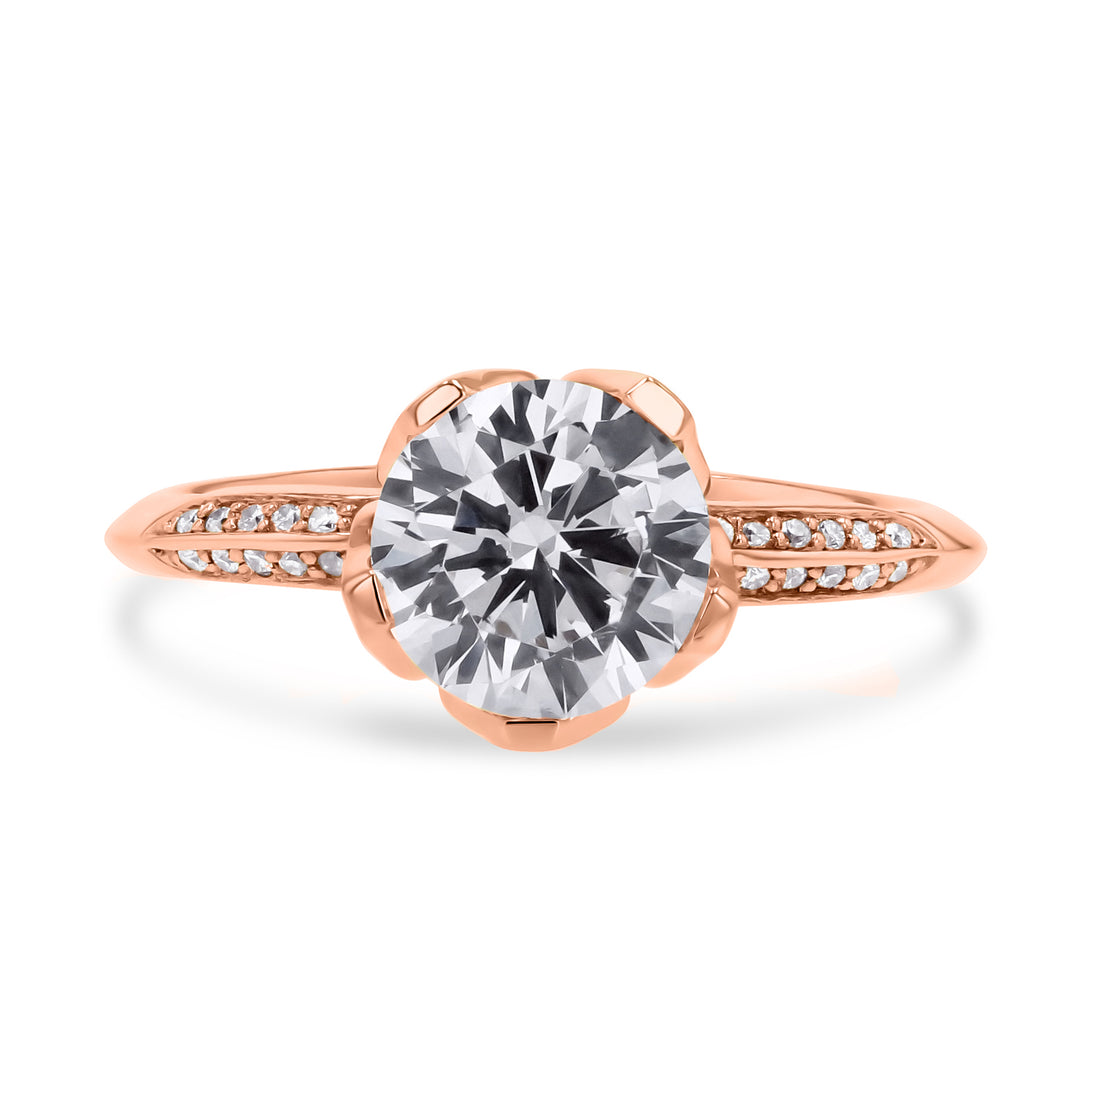 MaeVona Floral Setting Engagement Ring - Skeie's Jewelers